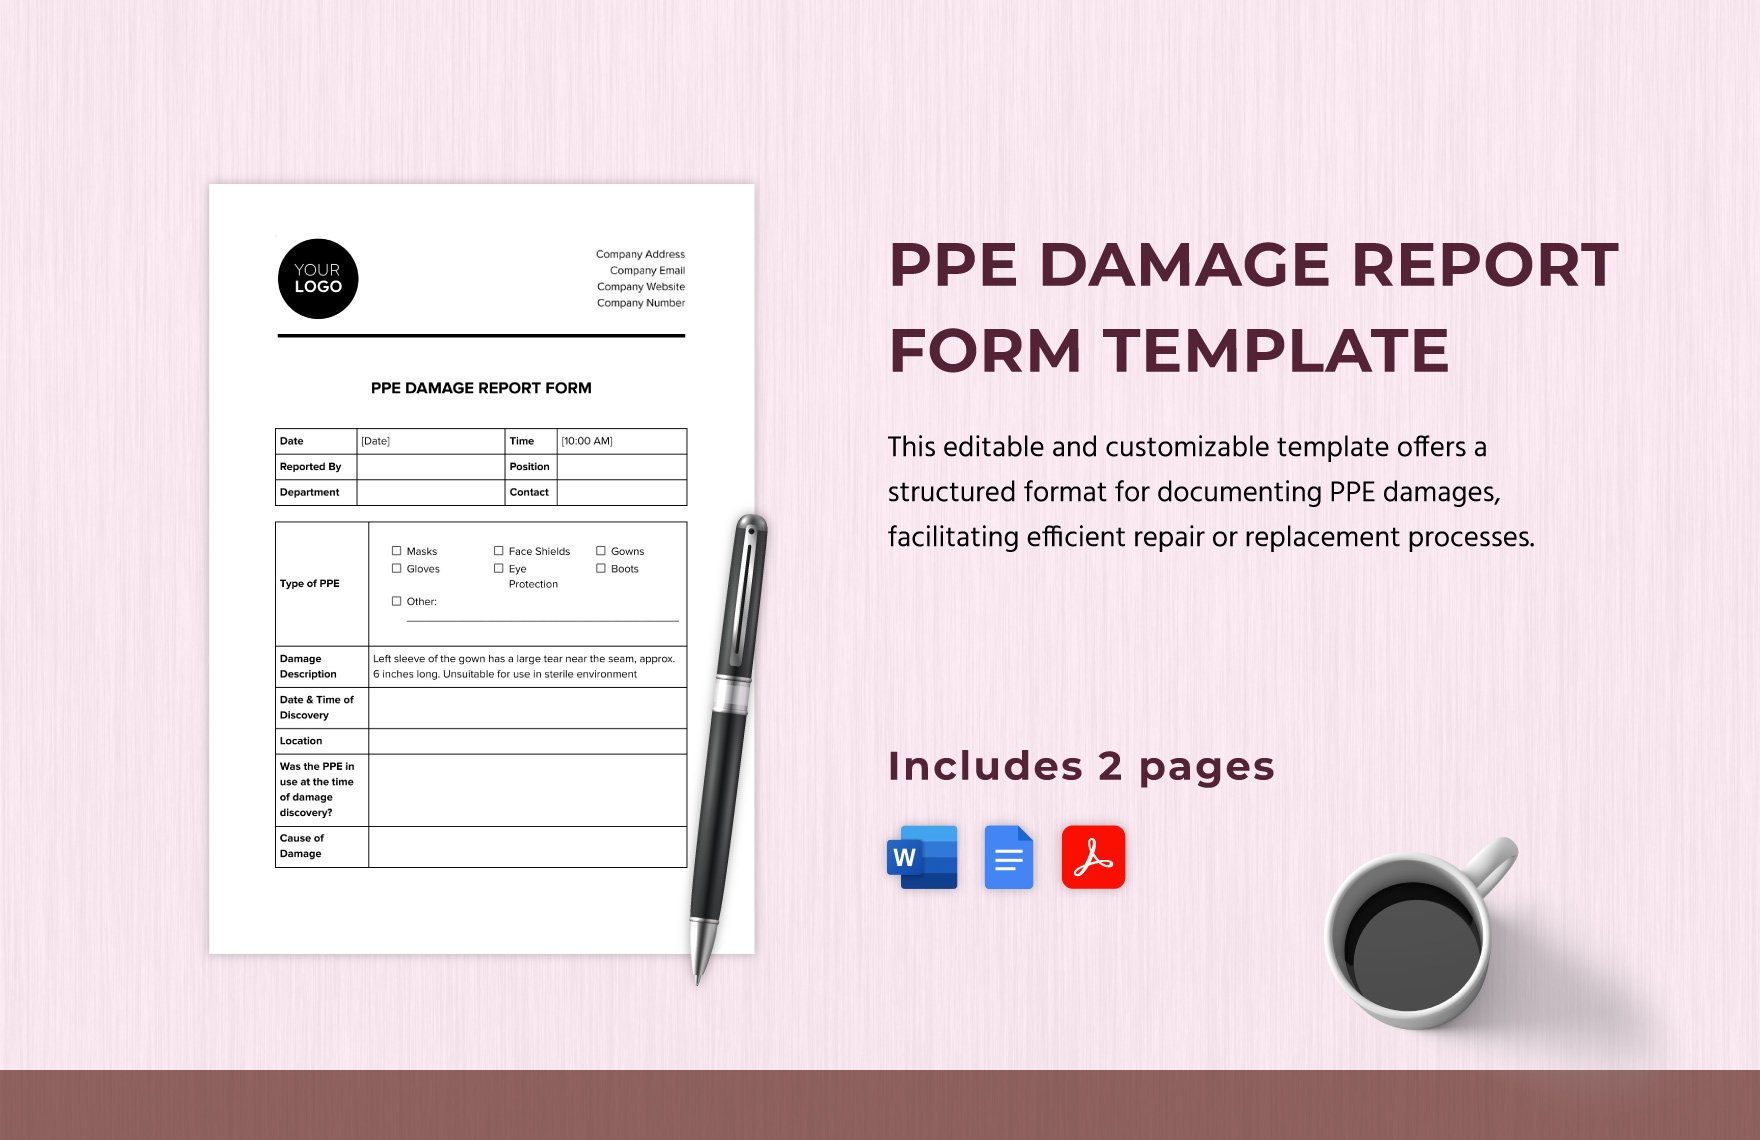 PPE Damage Report Form Template